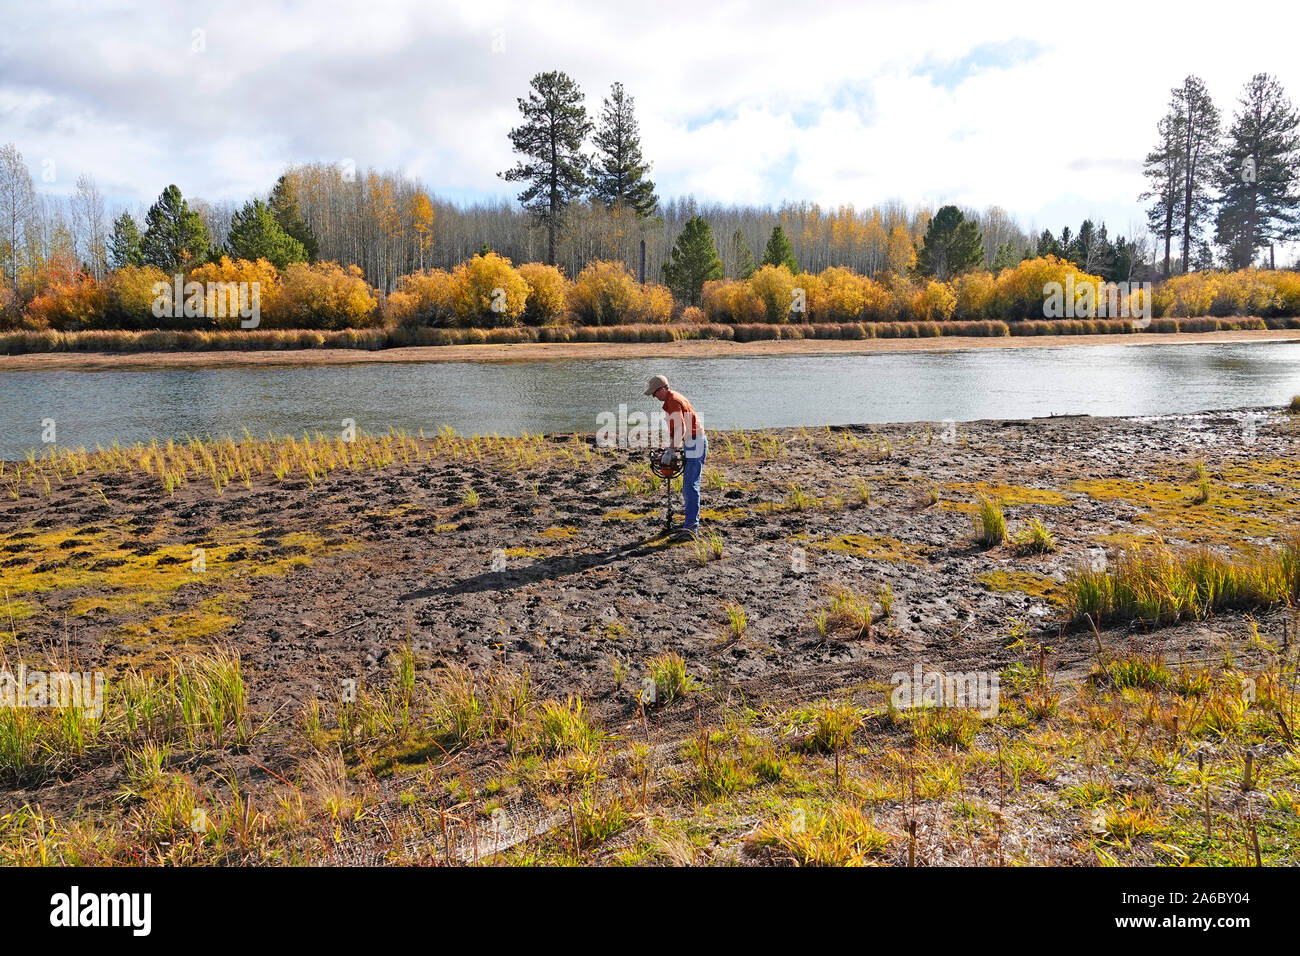 U.S. Forest Service employees plant sedge grass in eroded areas along the banks of the Deschutes River near Bend, Oregon. Stock Photo